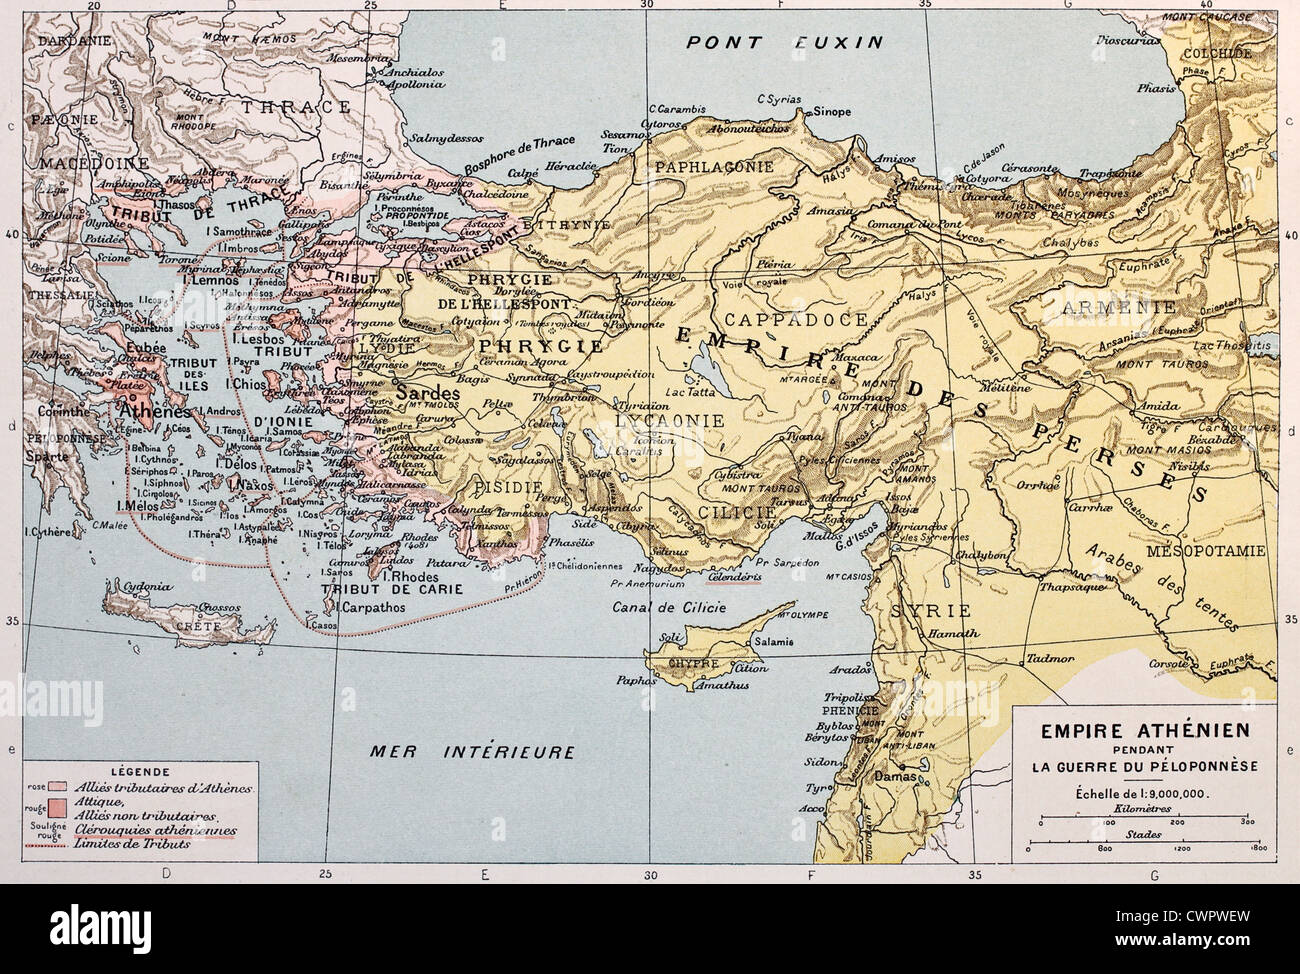 Athenian empire old map Stock Photo